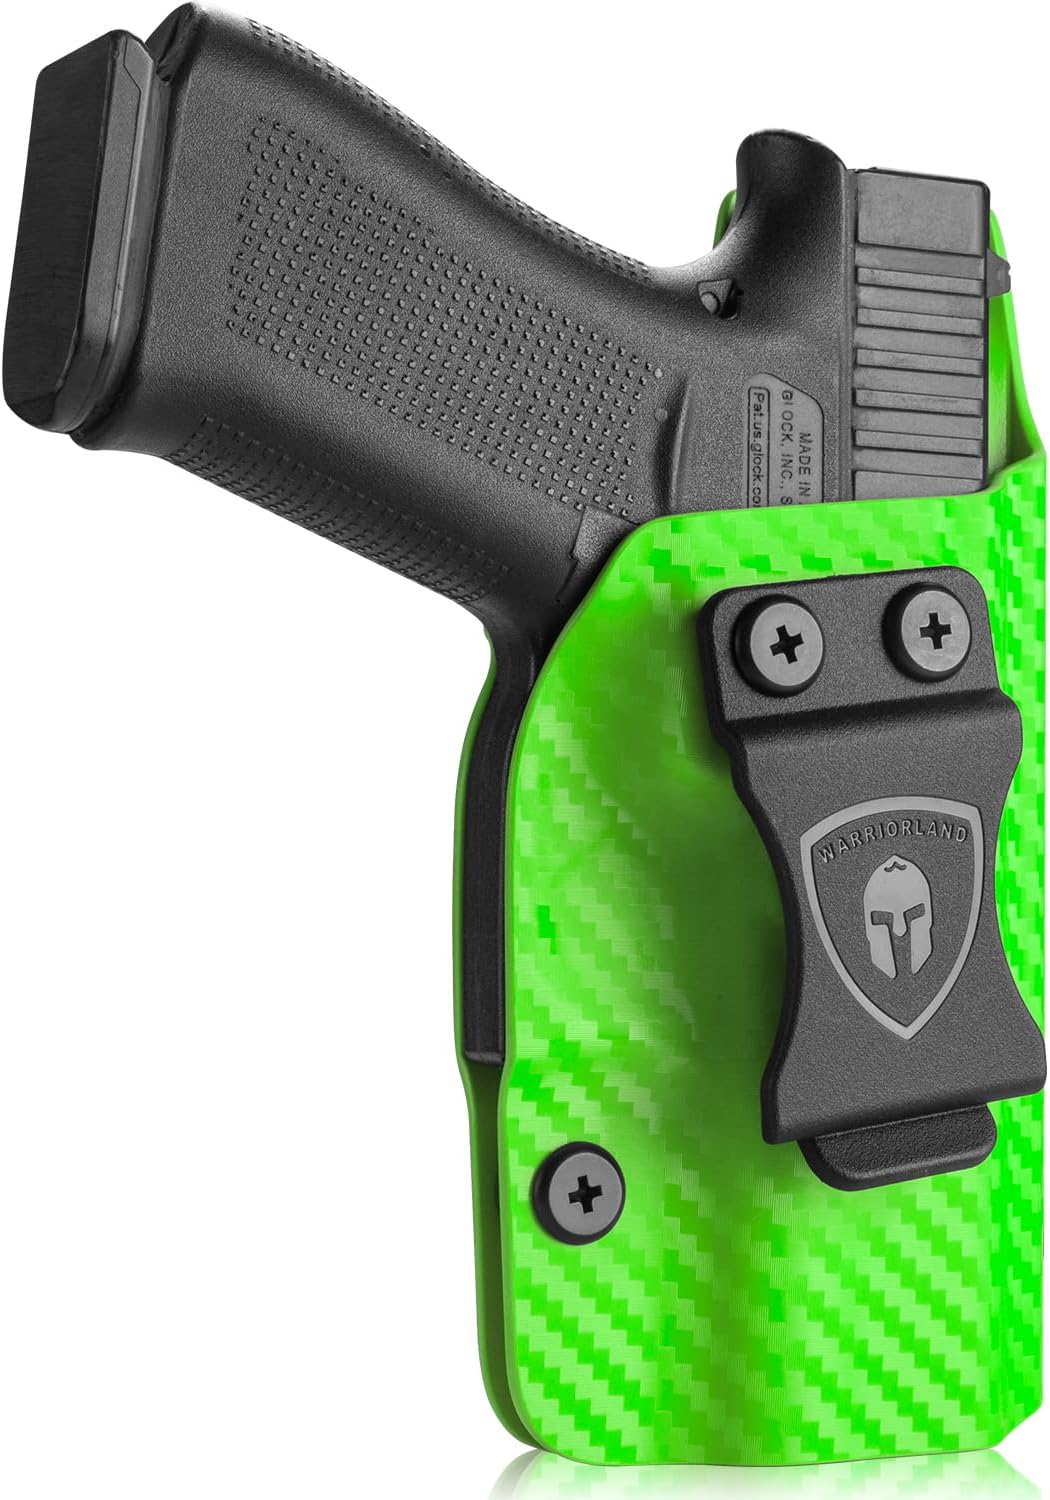 Glock 43/43X/MOS IWB Colorful Carbon Fiber Kydex Holsters| Right Hand | Warriorland